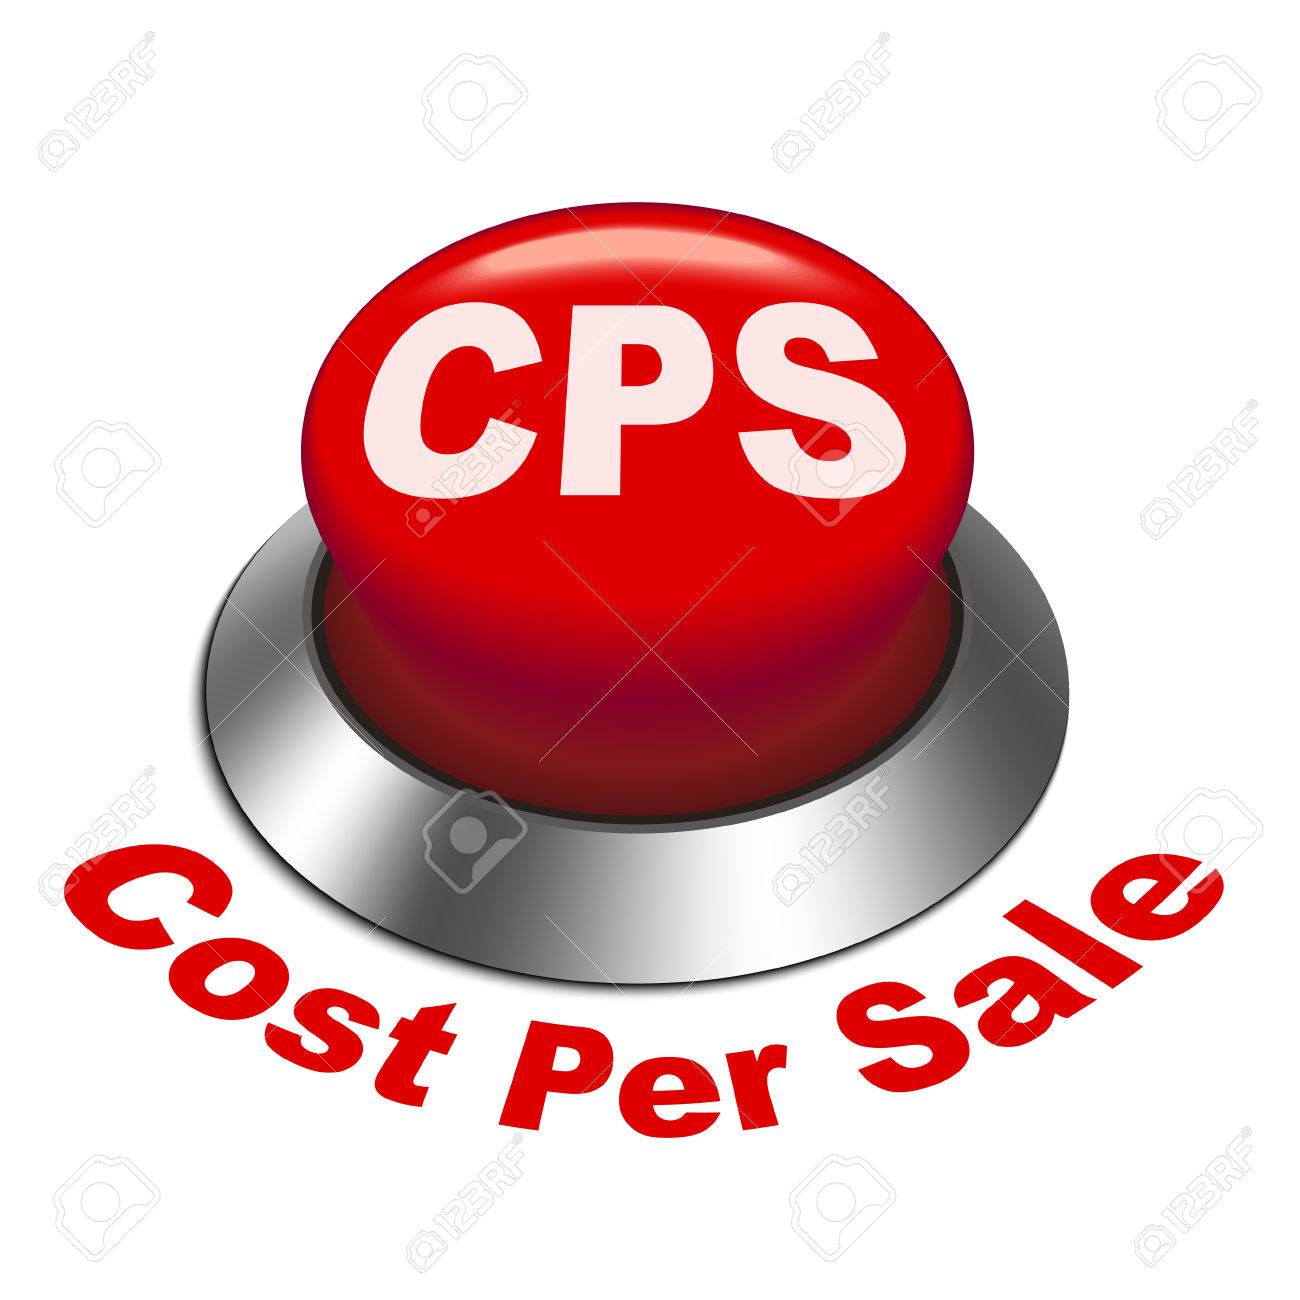 3d Illustration Of Cps Cost Per Sale Button Isolated White